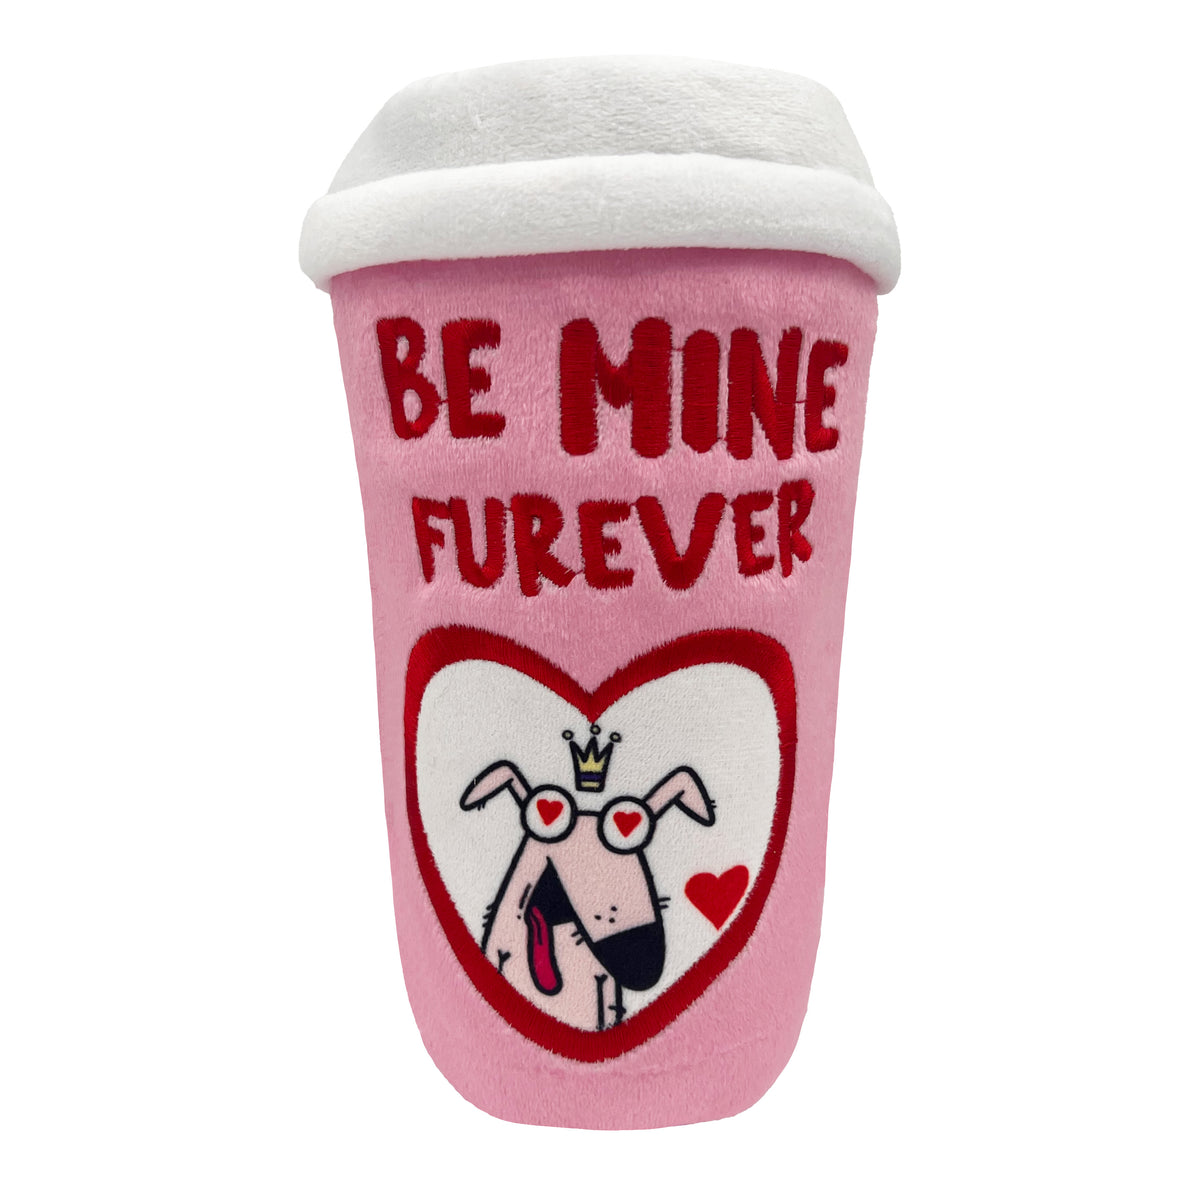 Be Mine Furever Coffee (Double Sided)